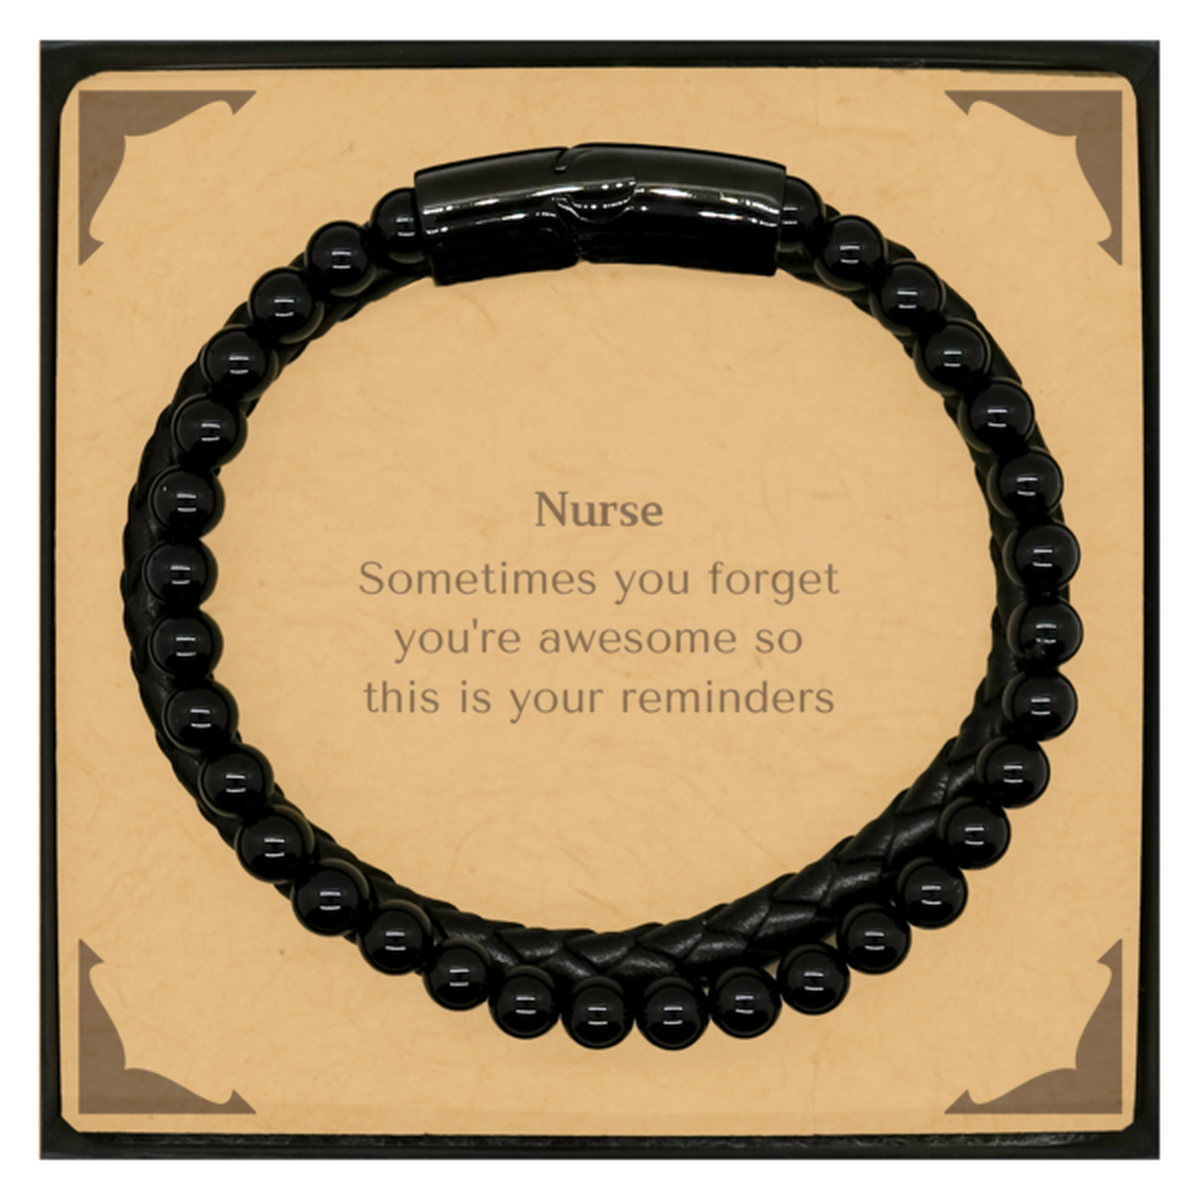 Sentimental Nurse Stone Leather Bracelets, Nurse Sometimes you forget you're awesome so this is your reminders, Graduation Christmas Birthday Gifts for Nurse, Men, Women, Coworkers